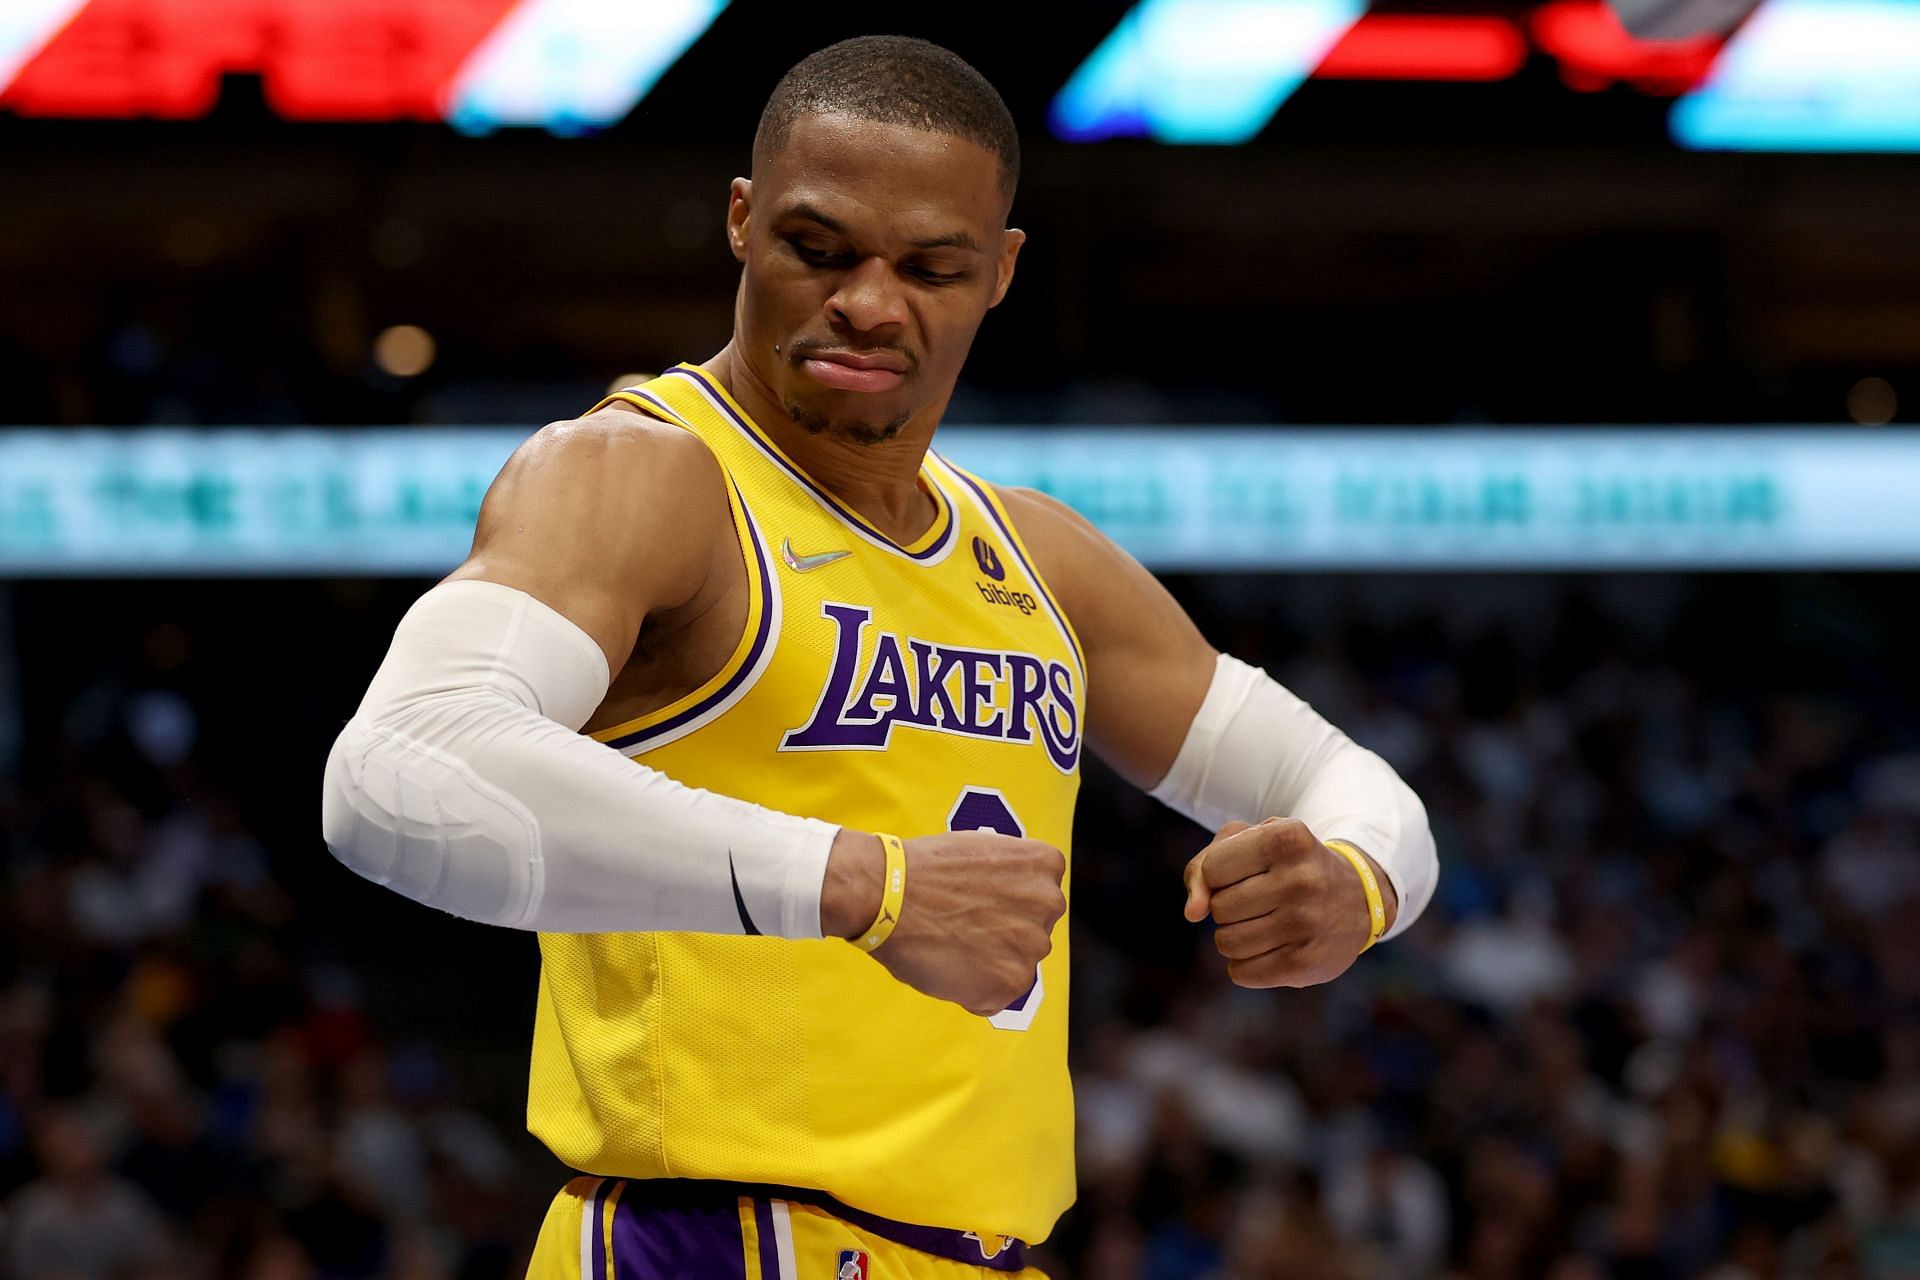 Los Angeles Lakers star guard Russell Westbrook has struggled lately.